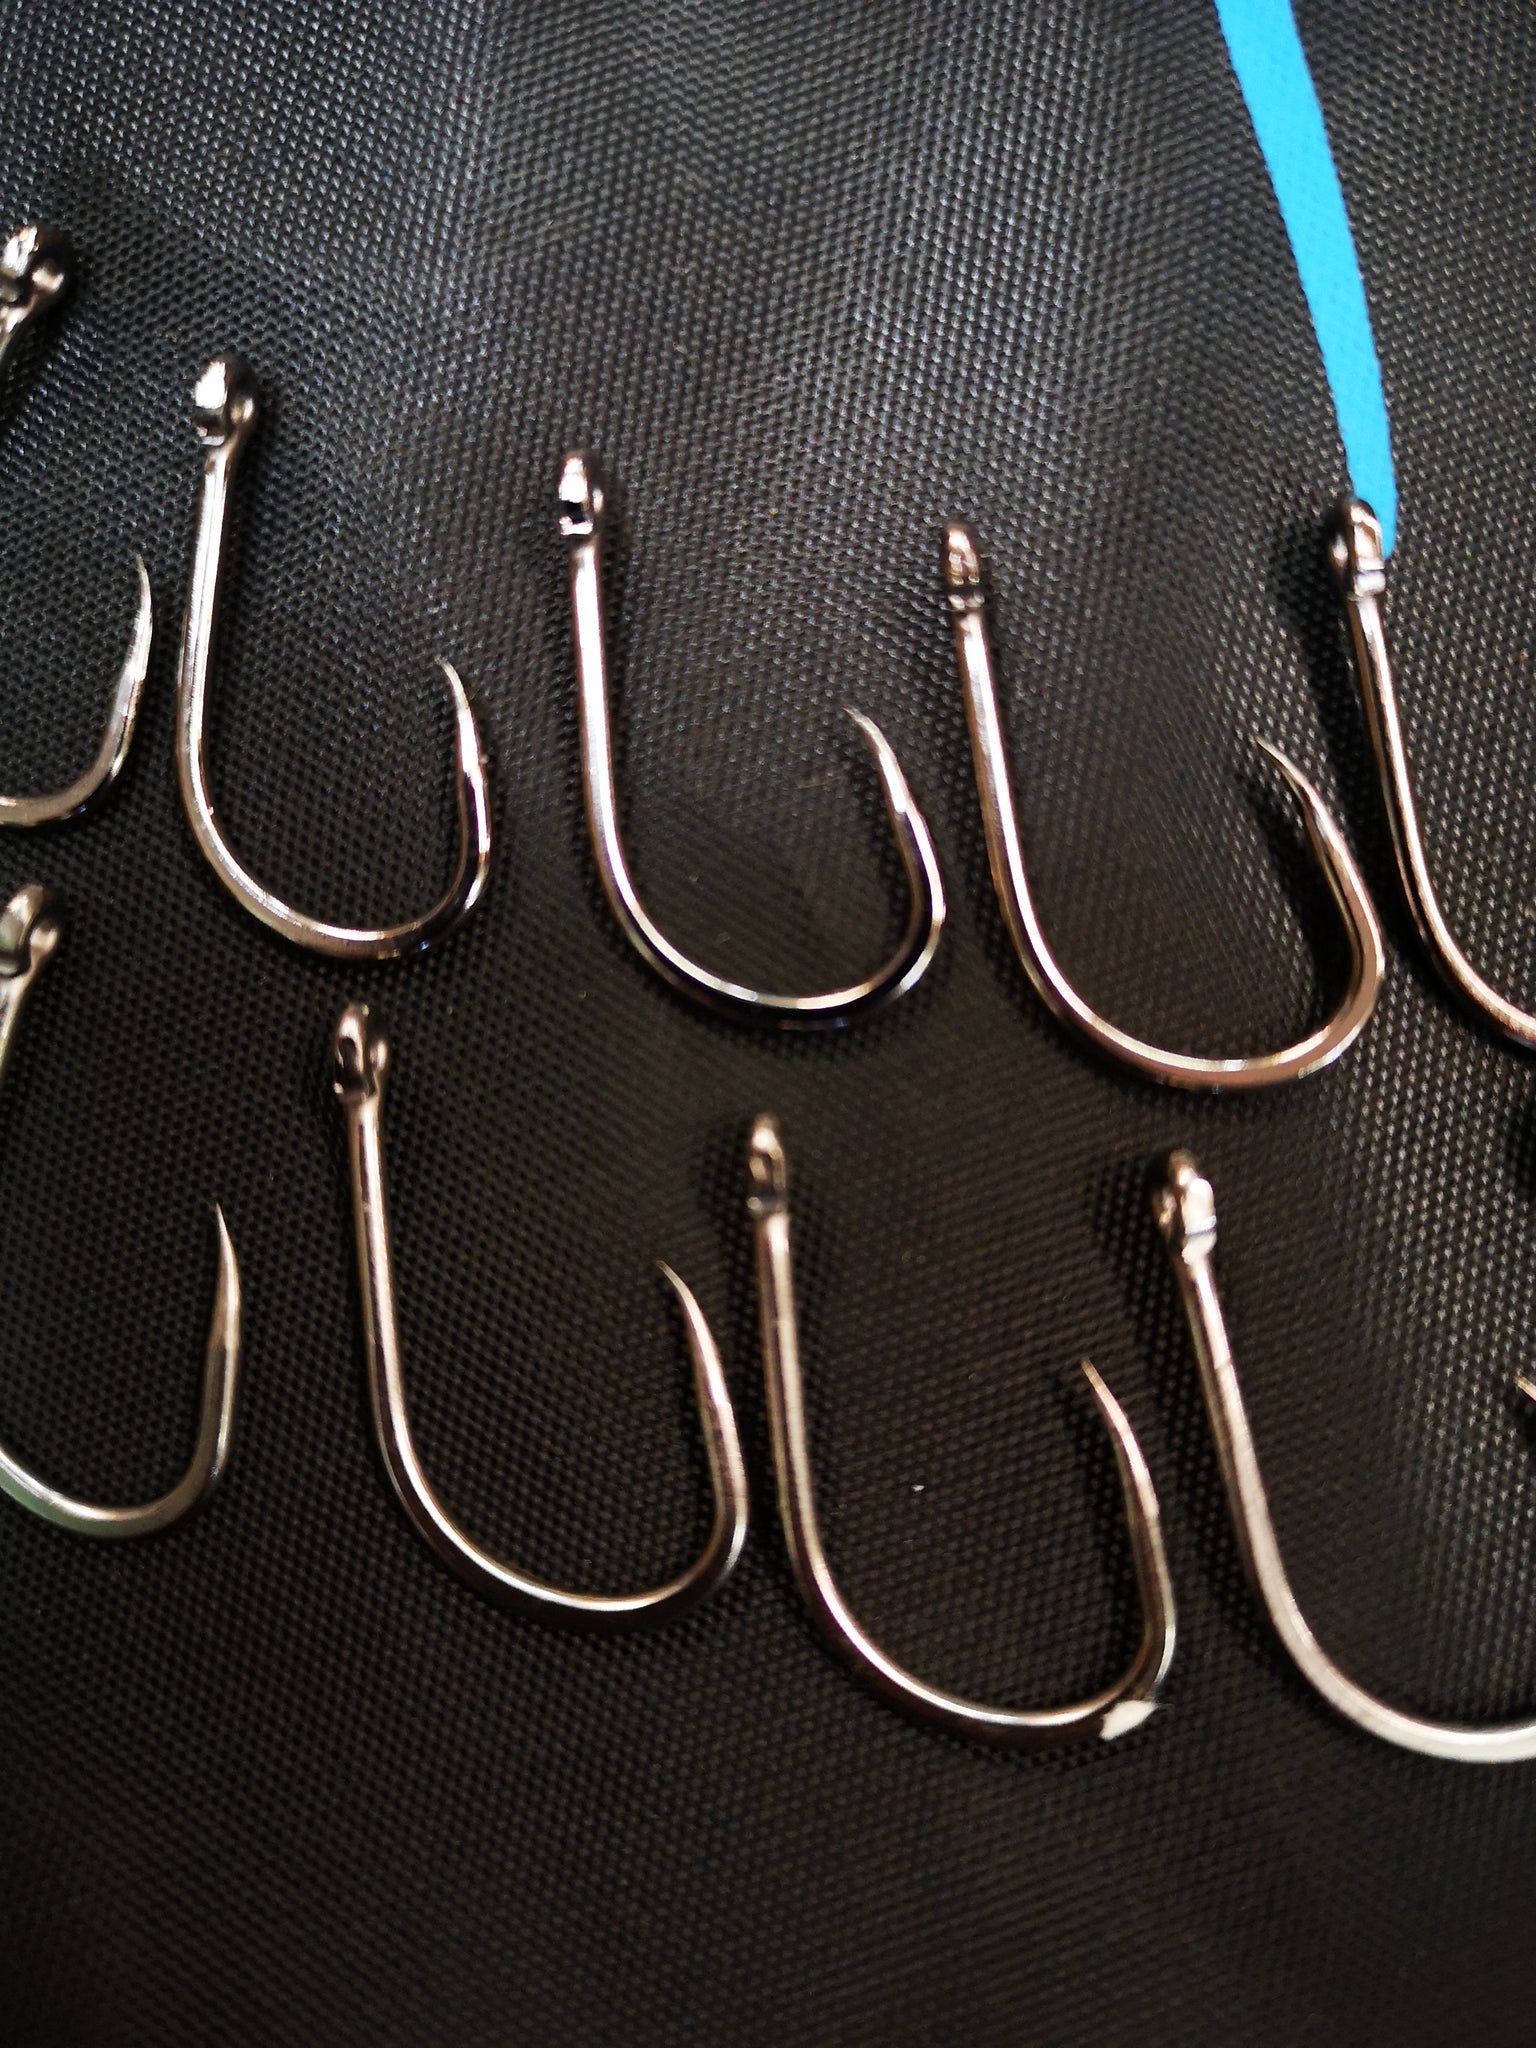 BP Special Hooks Size 1/0 to Size 6/0 (Barbless) – Catfish-Pro Ltd